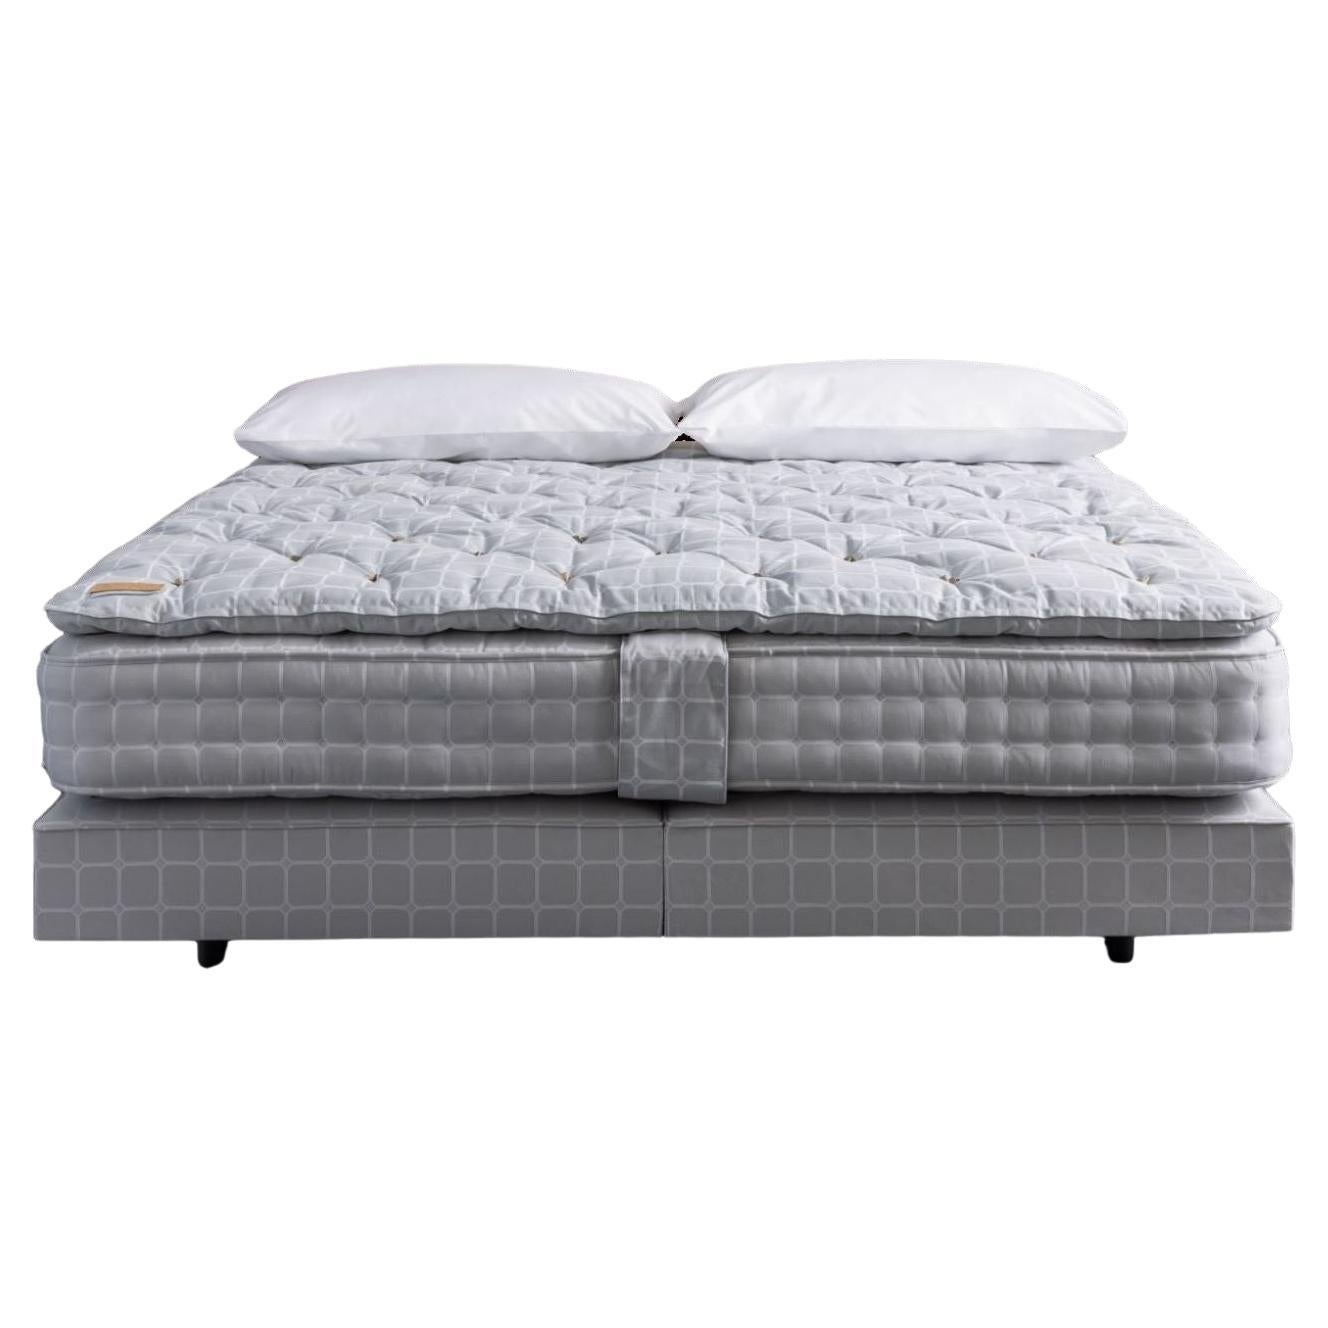 Savoir Nº5 Bed Set, Handmade to Order, US California King Size For Sale